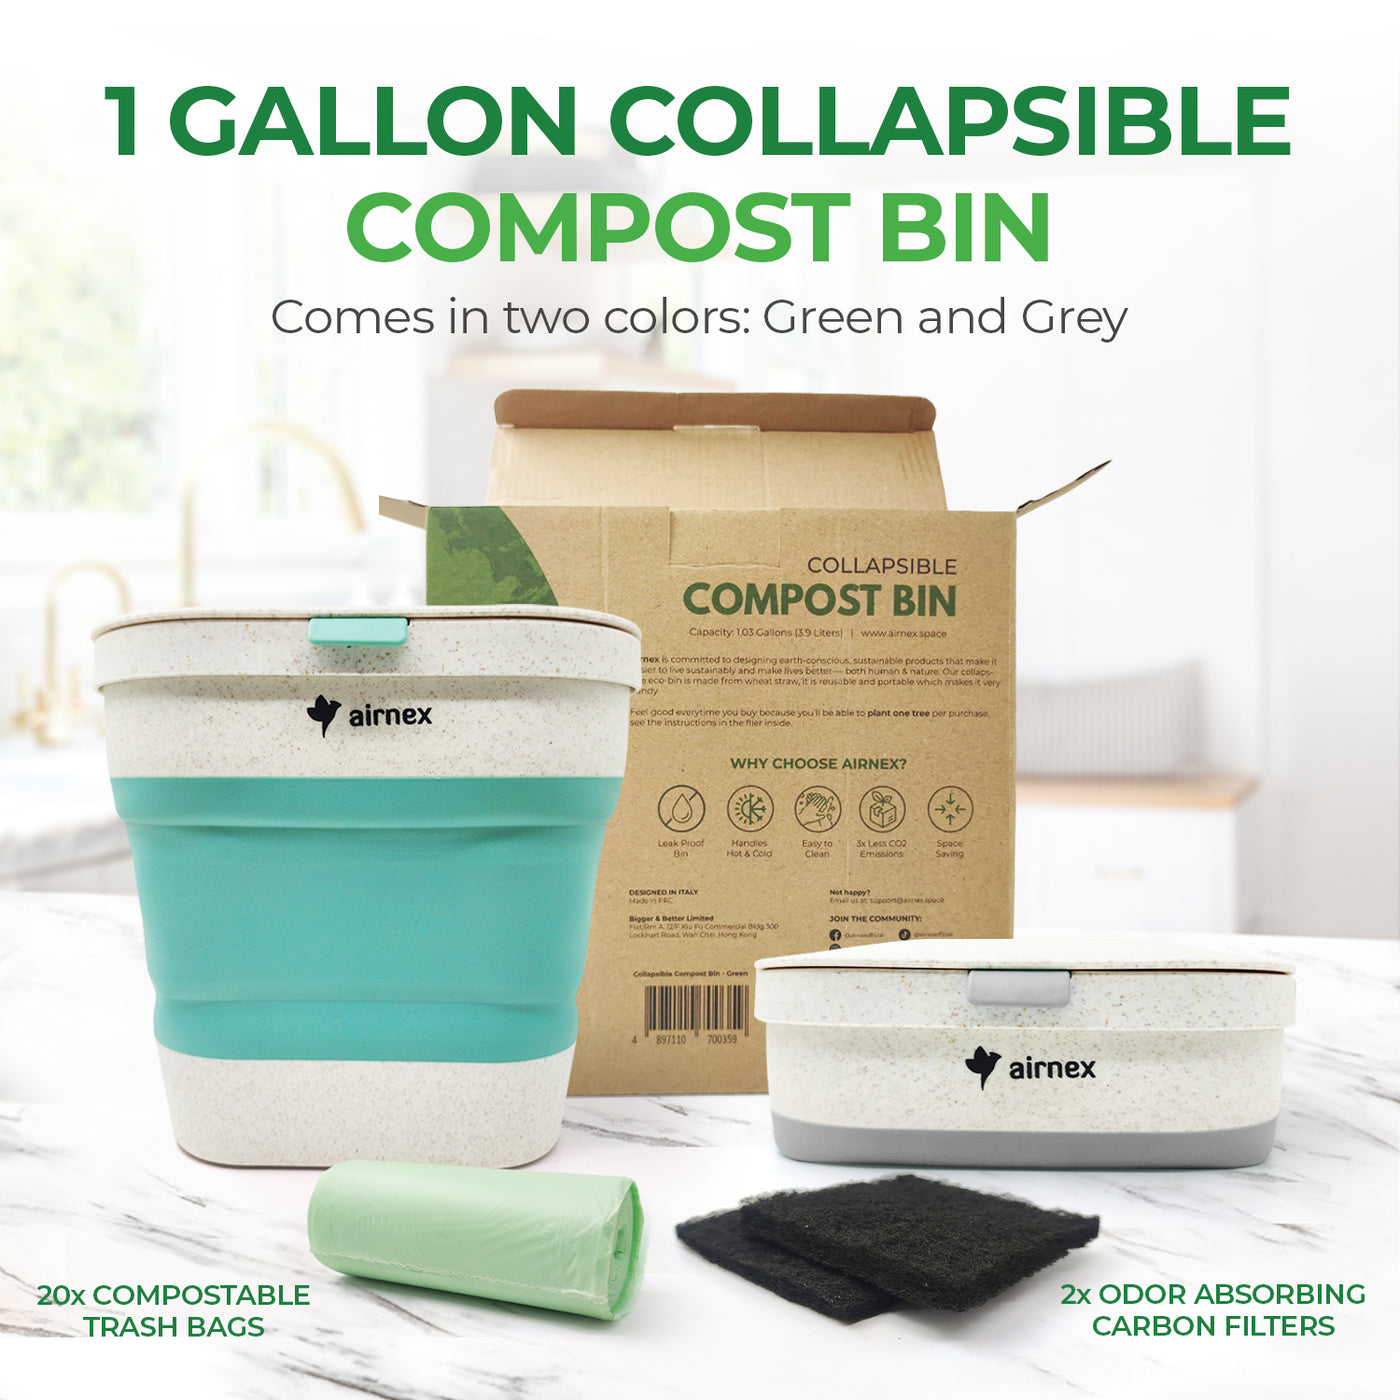 AIRNEX Collapsible Food Waste Bin with Lid - 1 Gallon Food Waste Caddy for Kitchen Made of Wheat Straw - Odor Free Compost Bin with Compostable